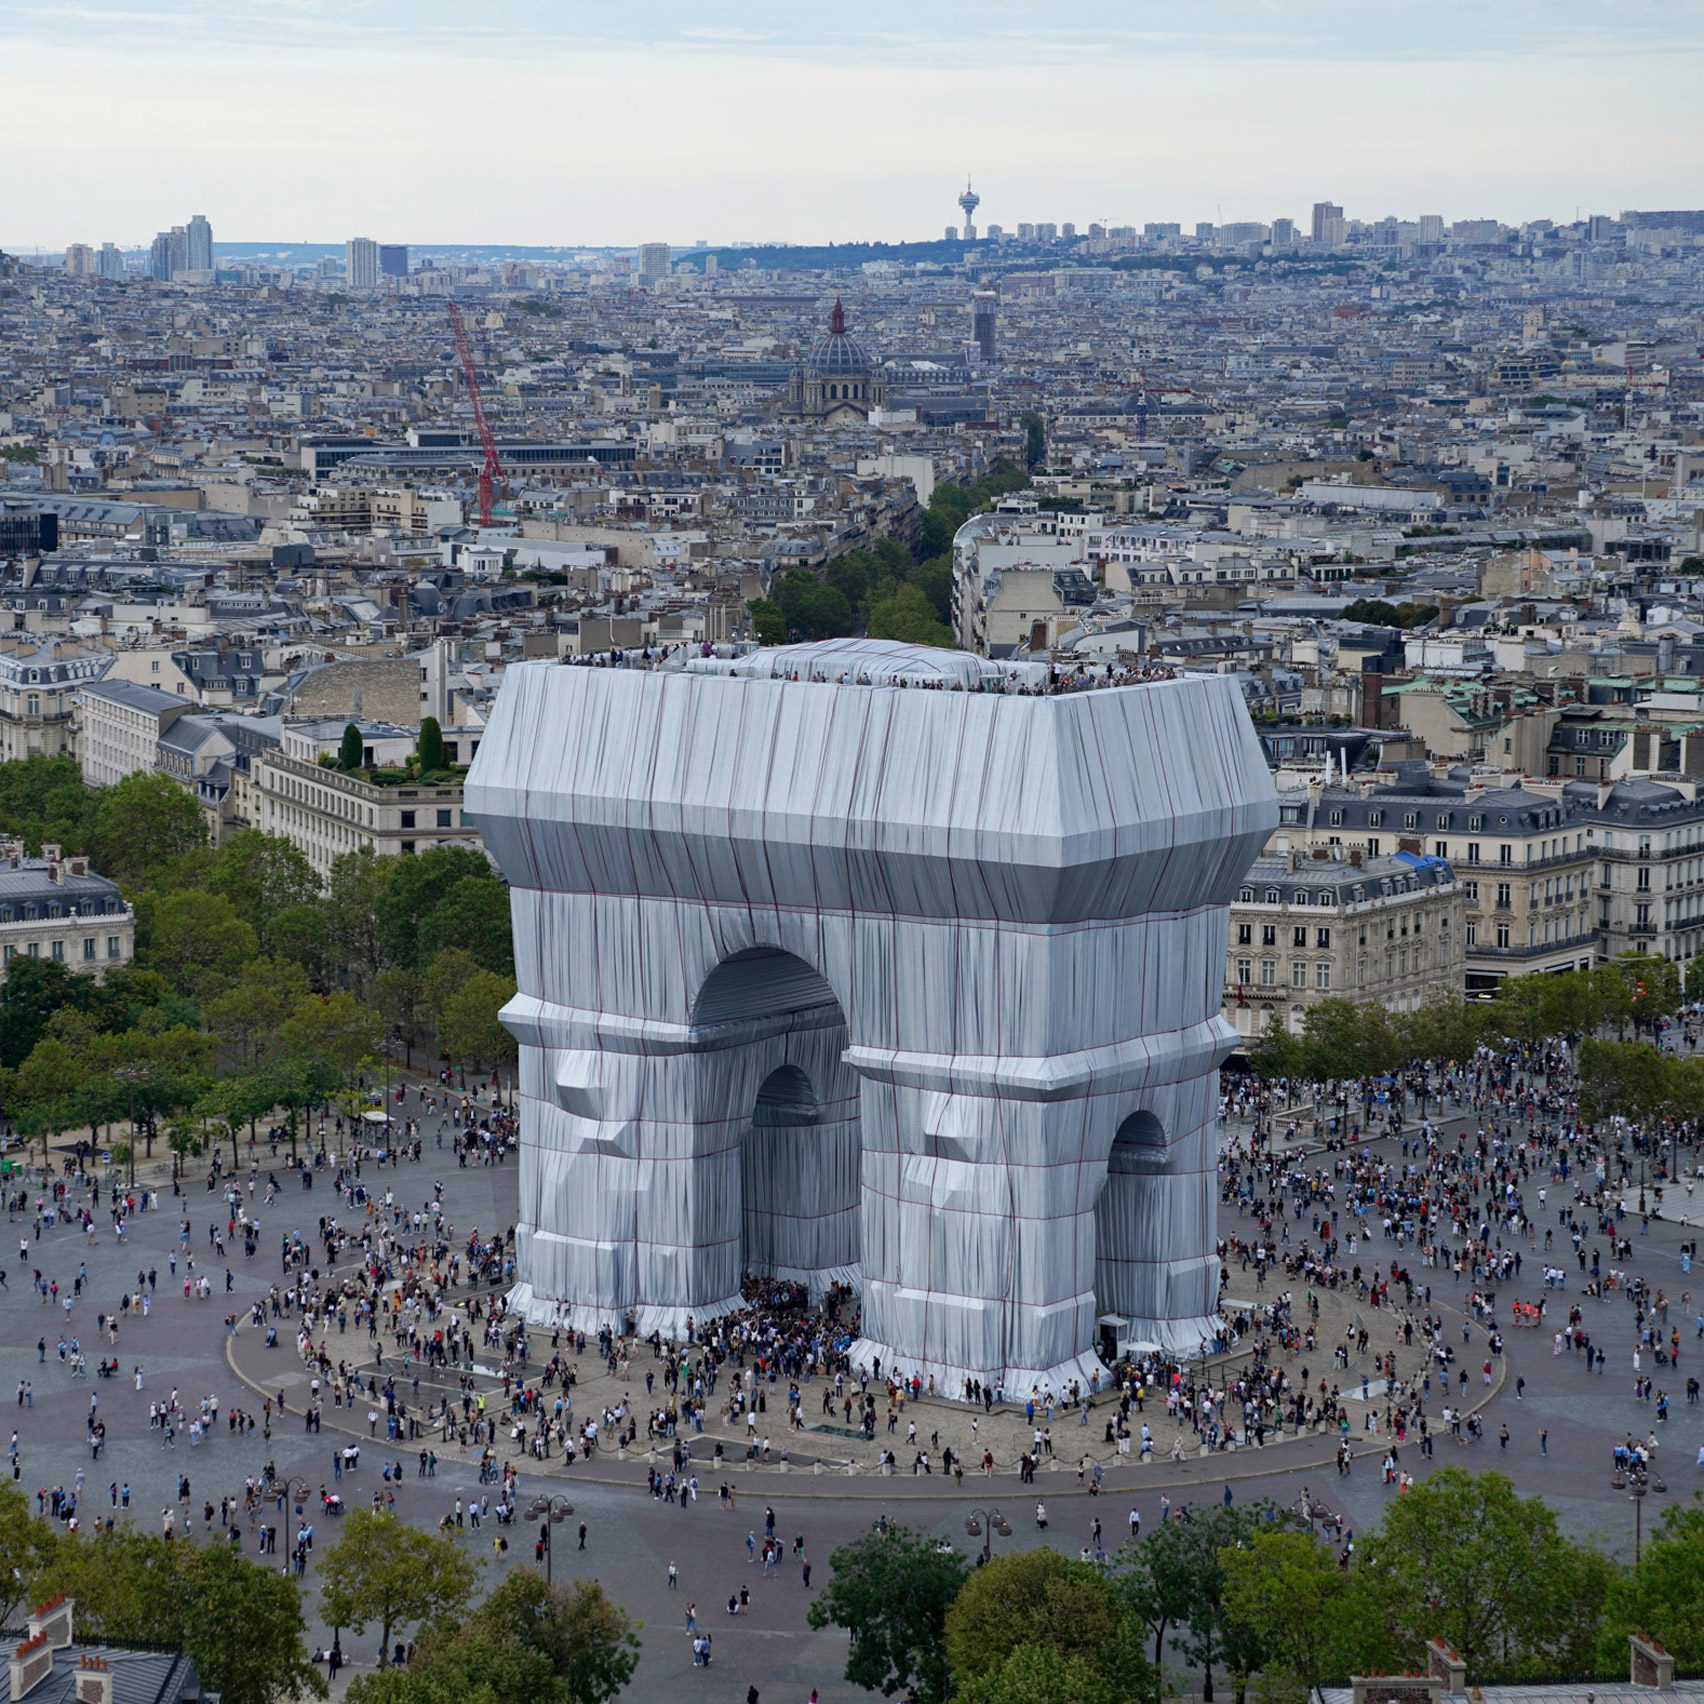 This week the Arc de Triomphe was wrapped